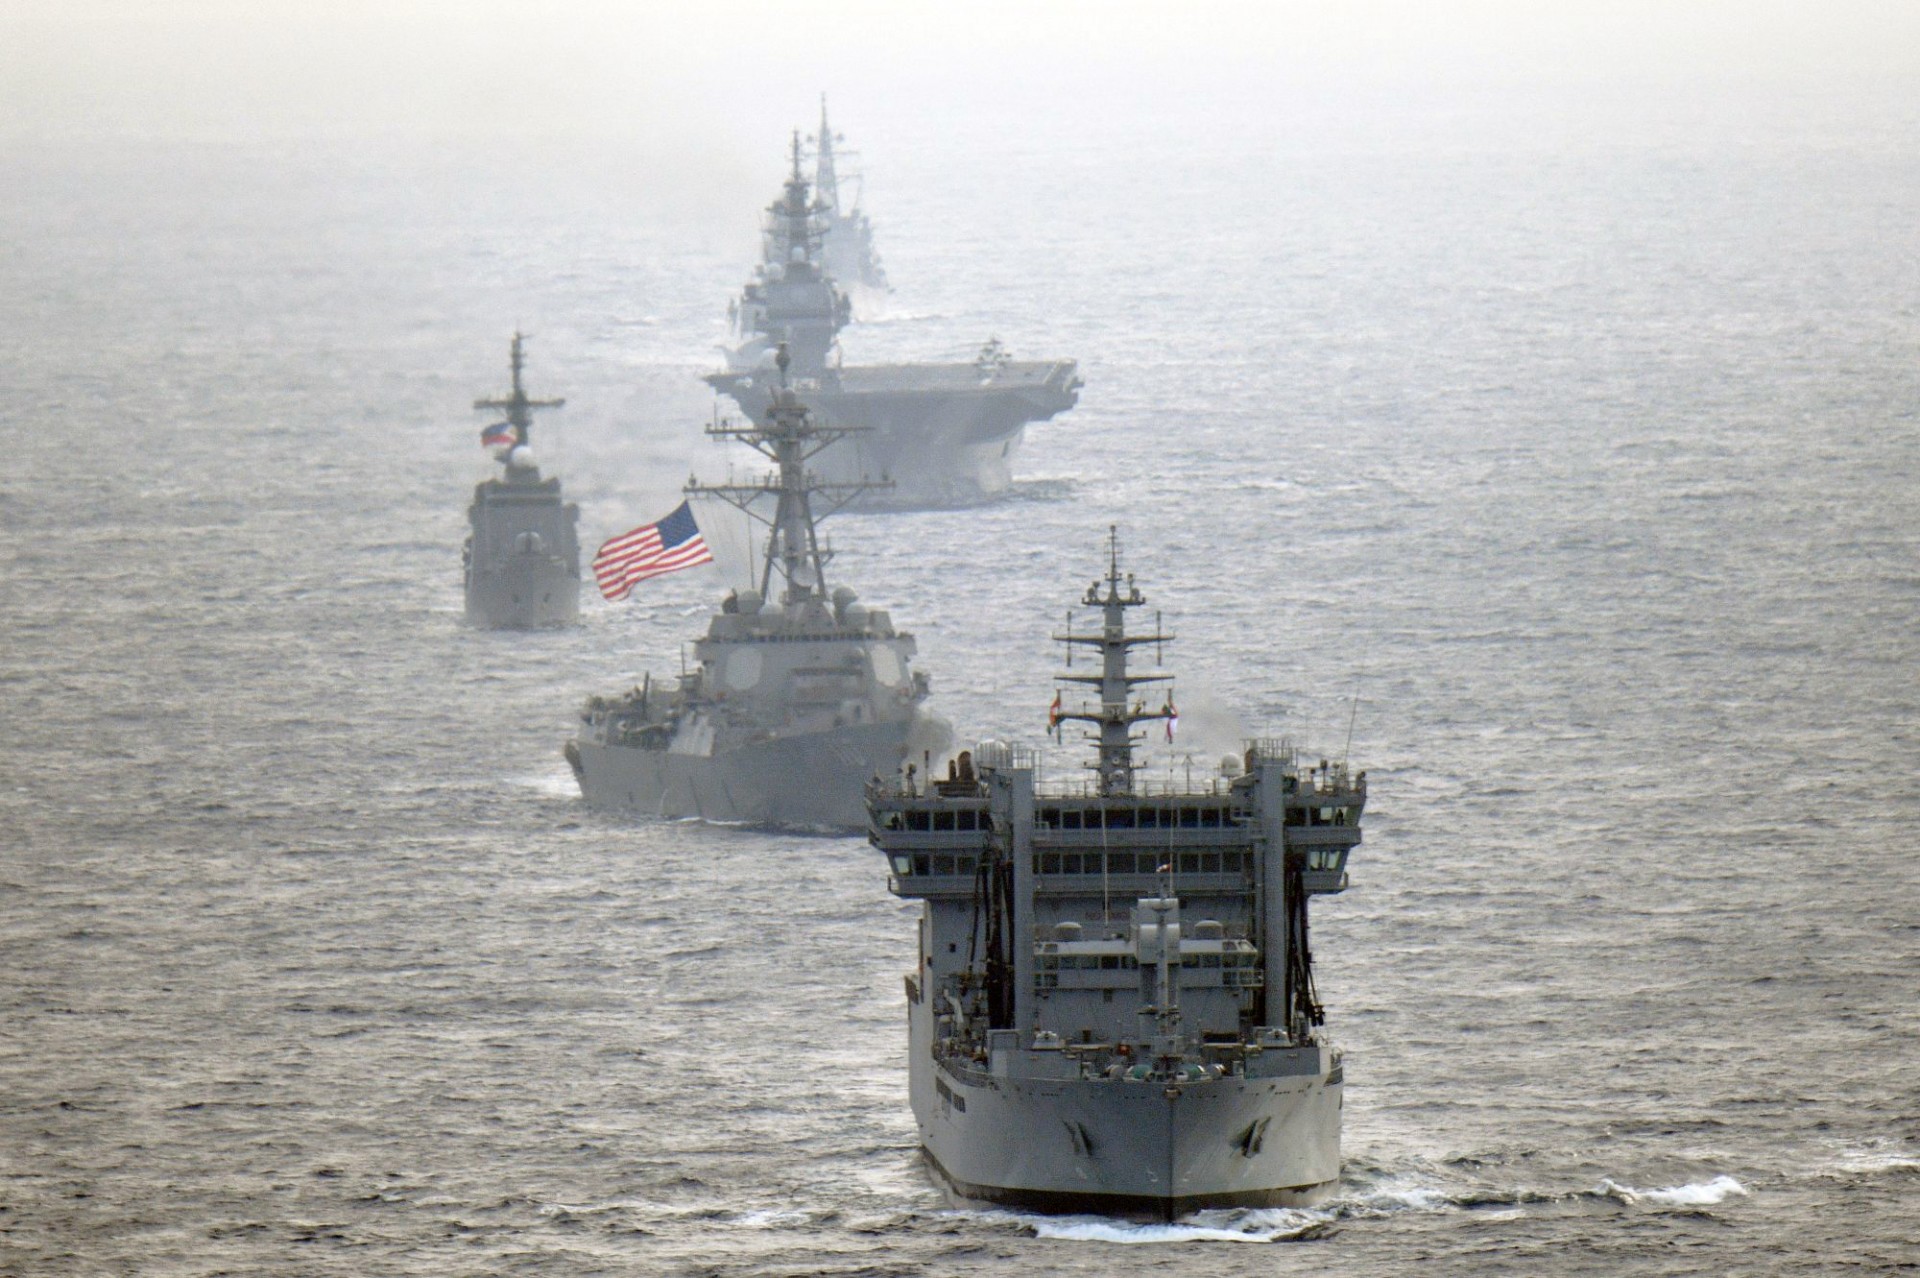 United States naval fleet in the South China Sea